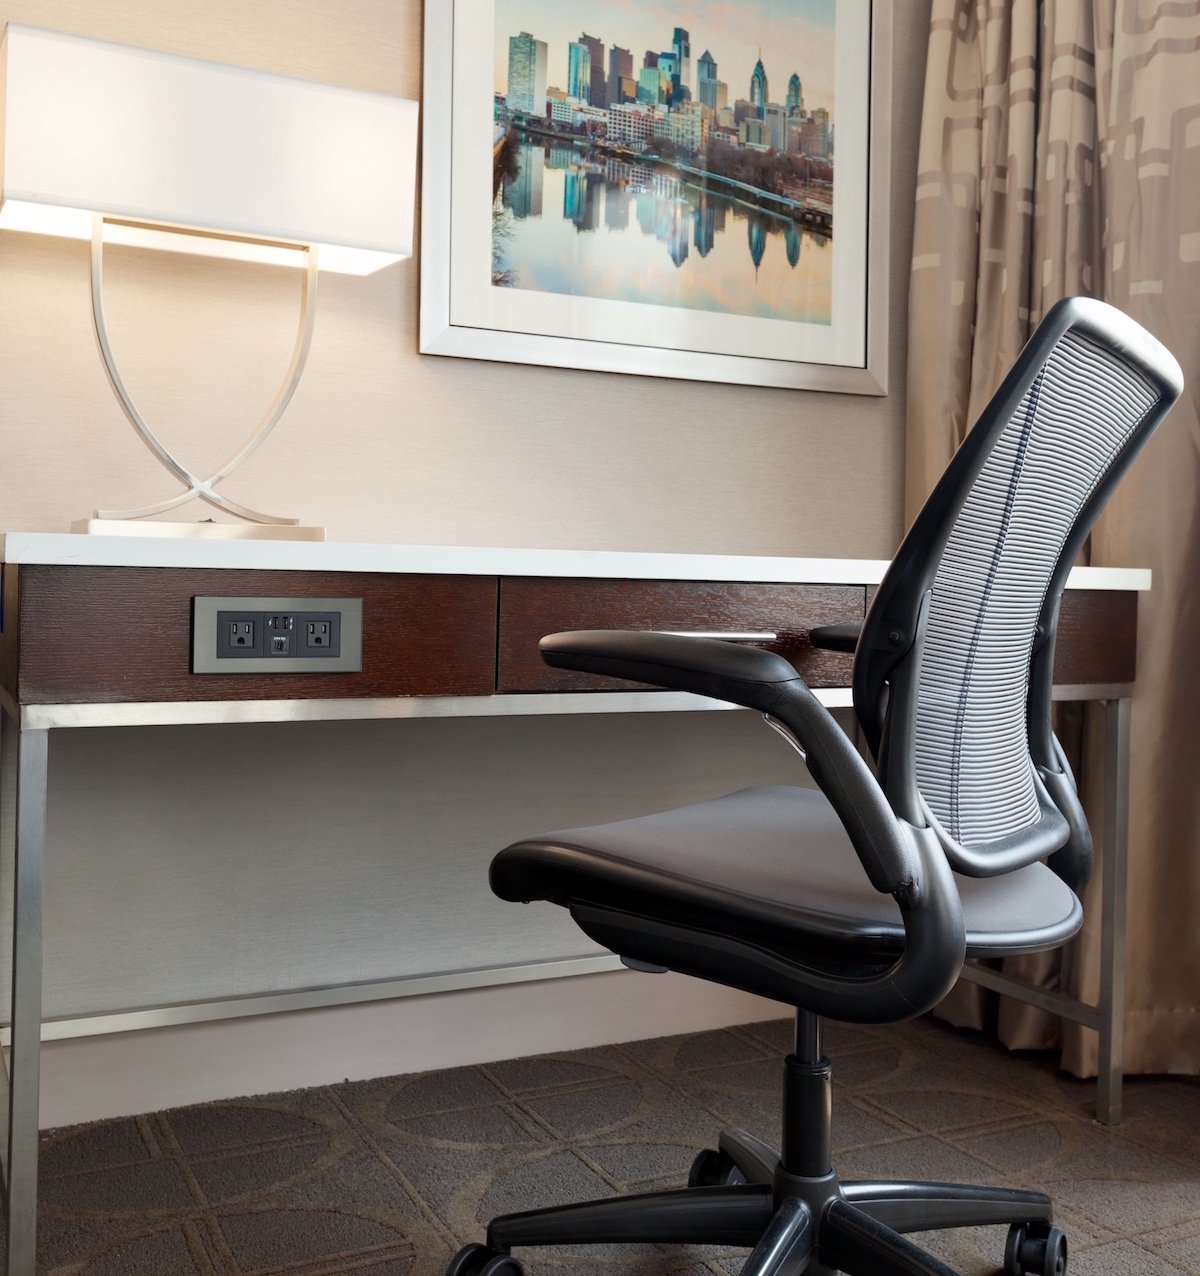 Day-use rooms include a spacious desk, ergonomic chair, and enhanced WiFi